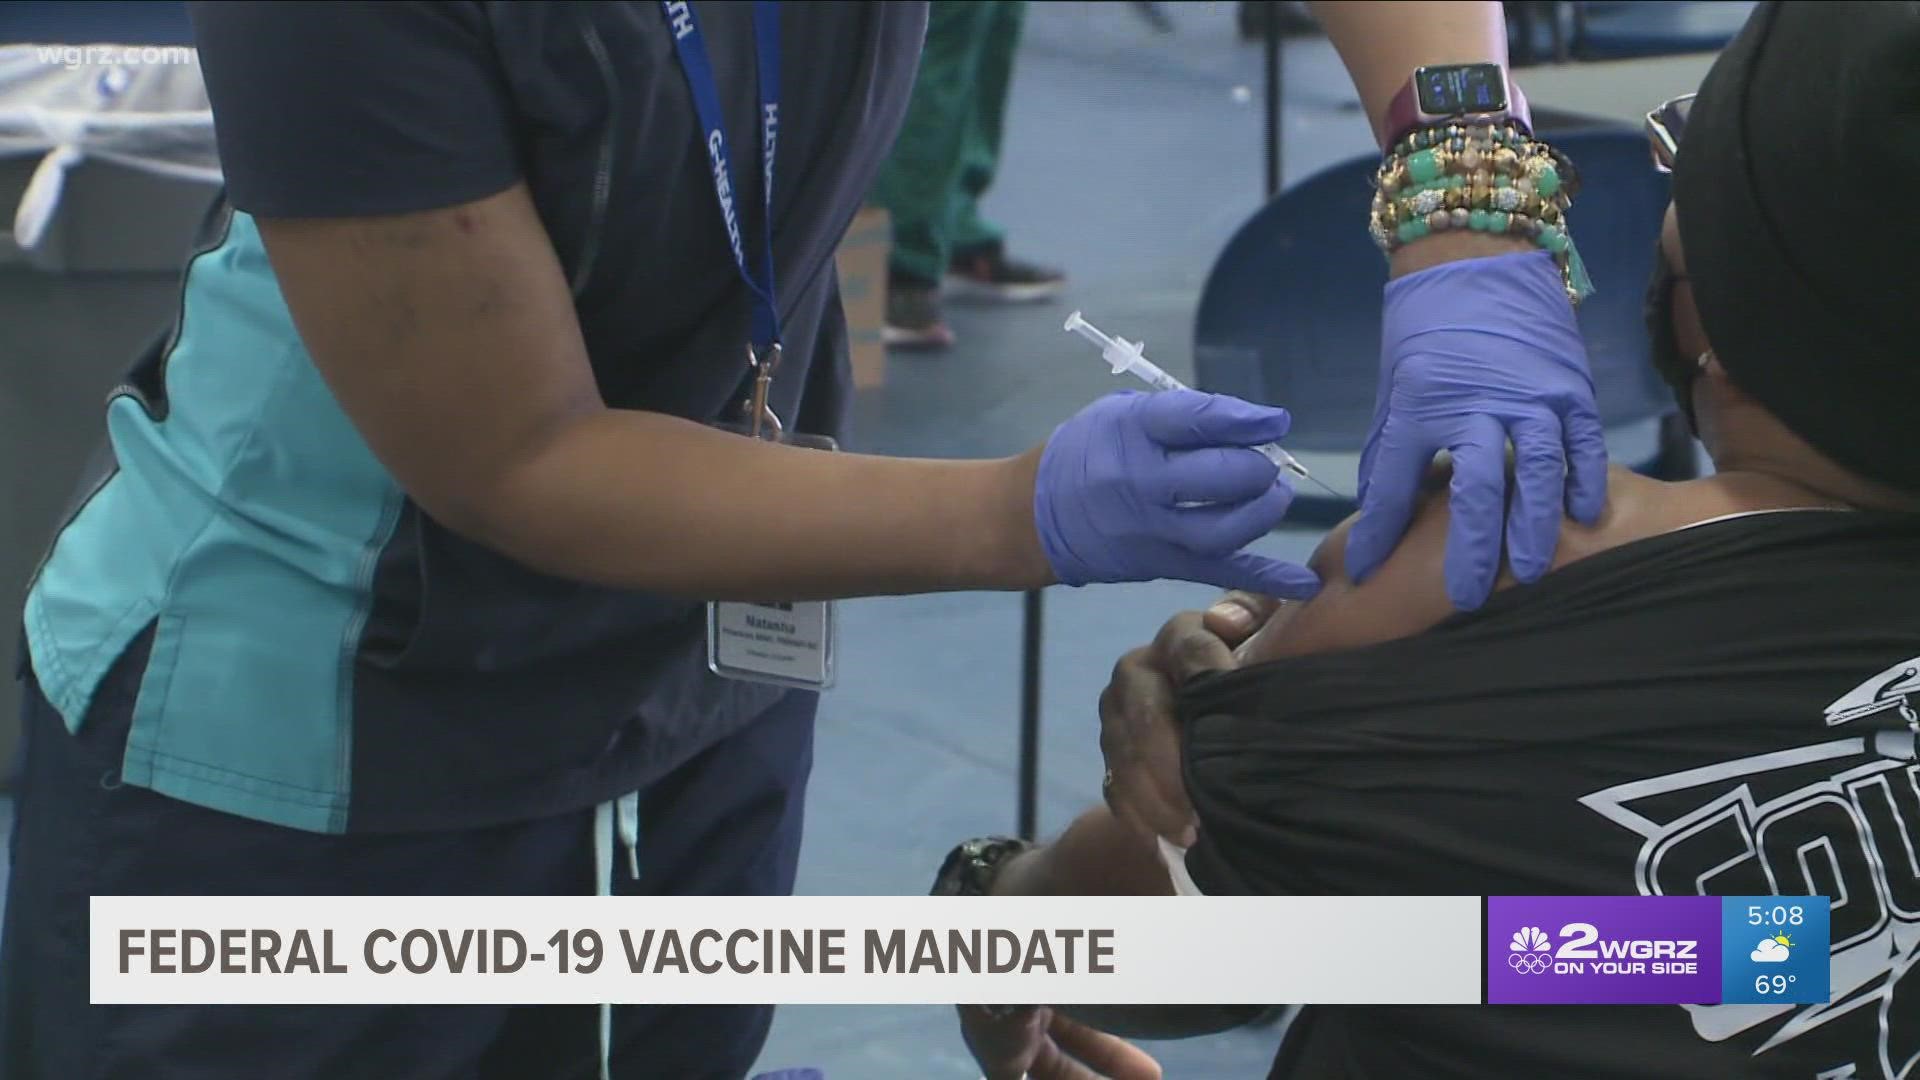 This vaccine mandate is being proposed at a time when many local employers are still looking to fill a lot of job openings.